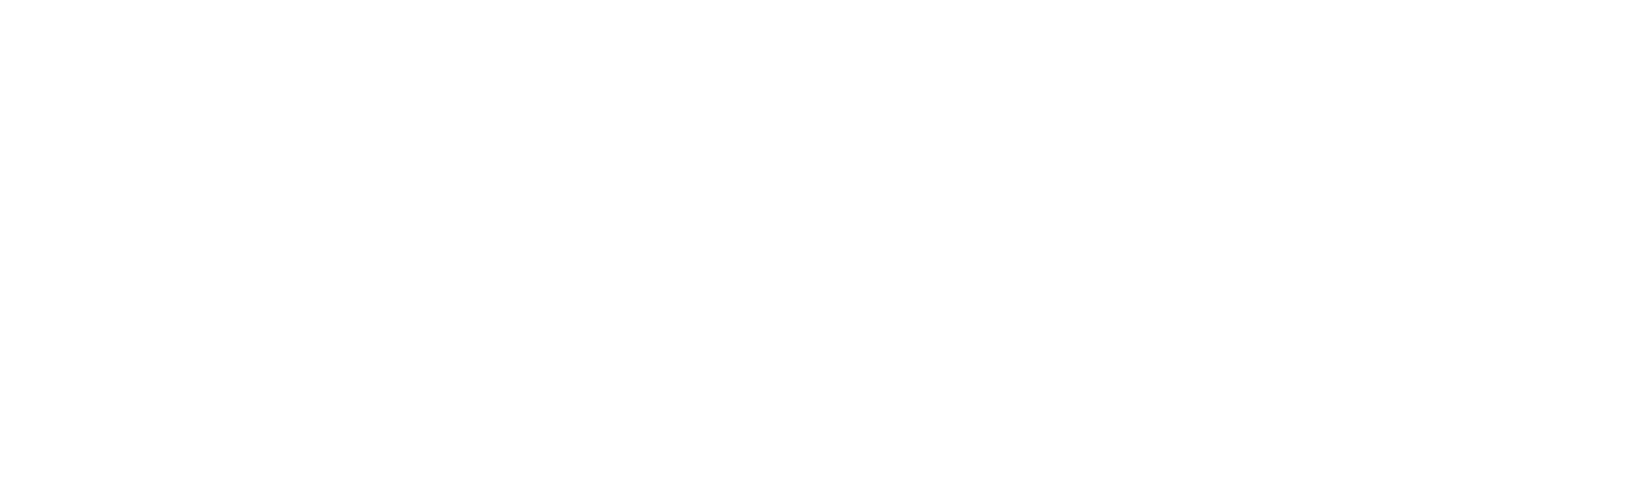 Managed by Campus Advantage